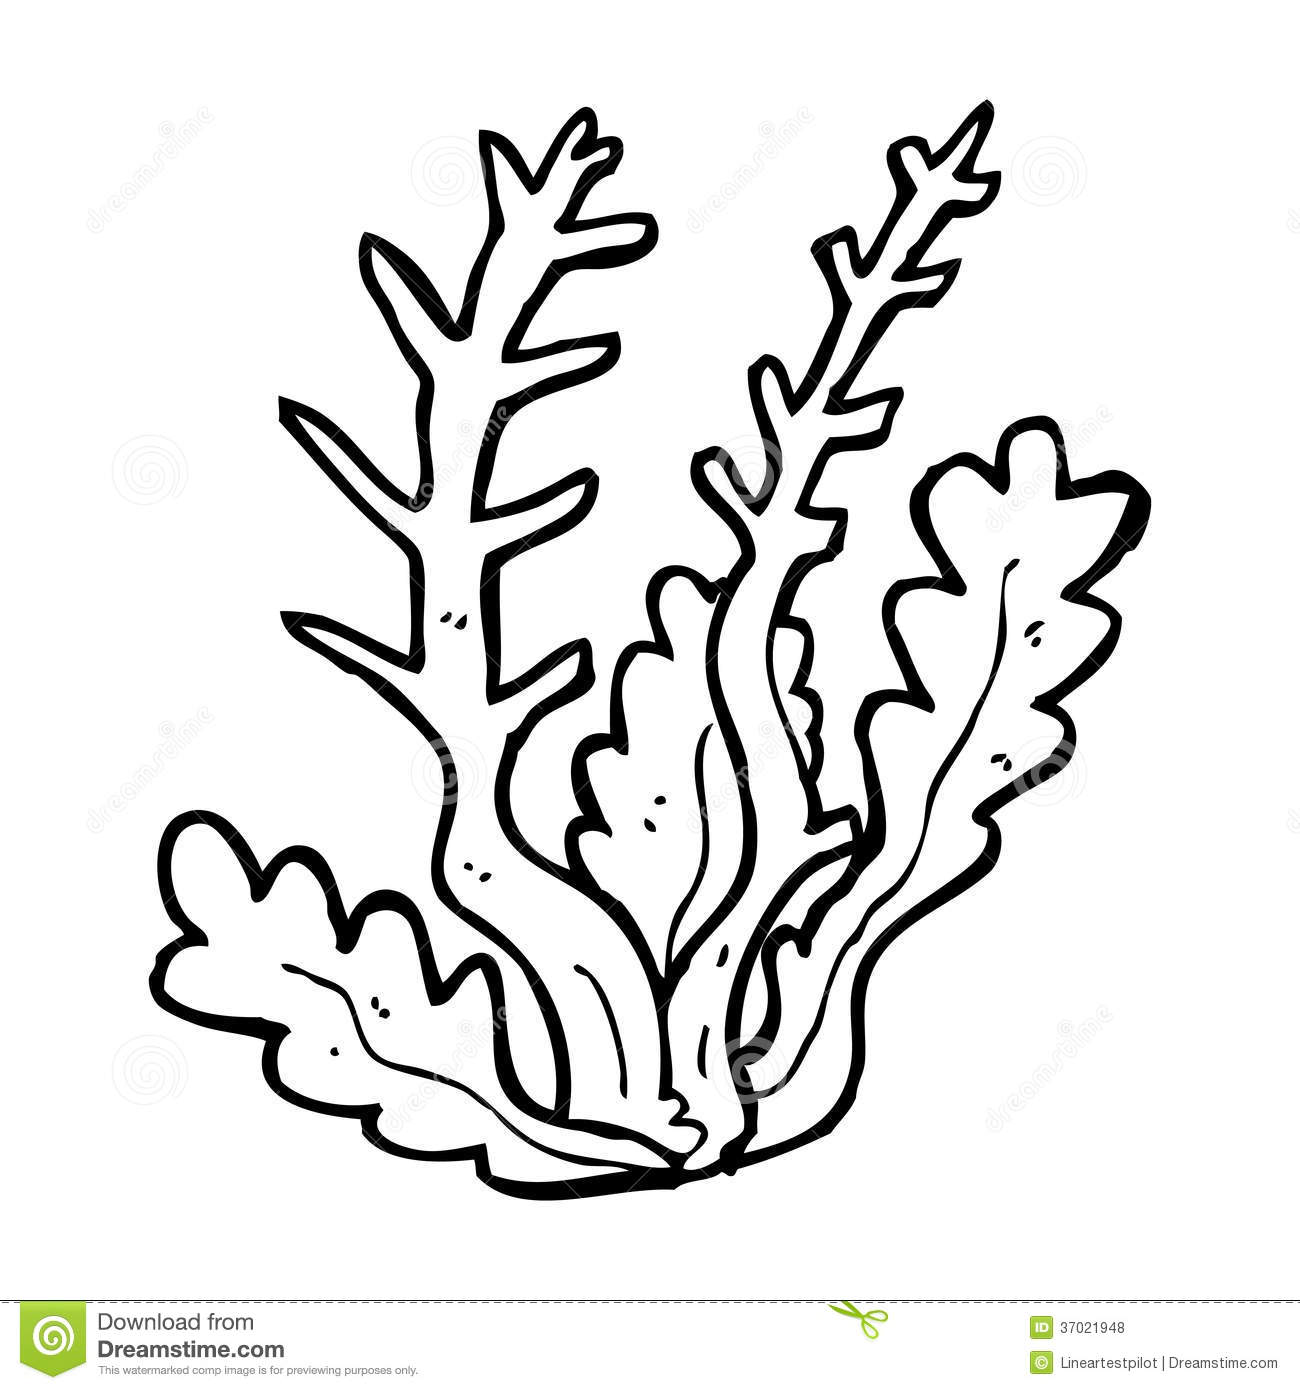 Seaweed Outline Clipart   Cliparthut   Free Clipart